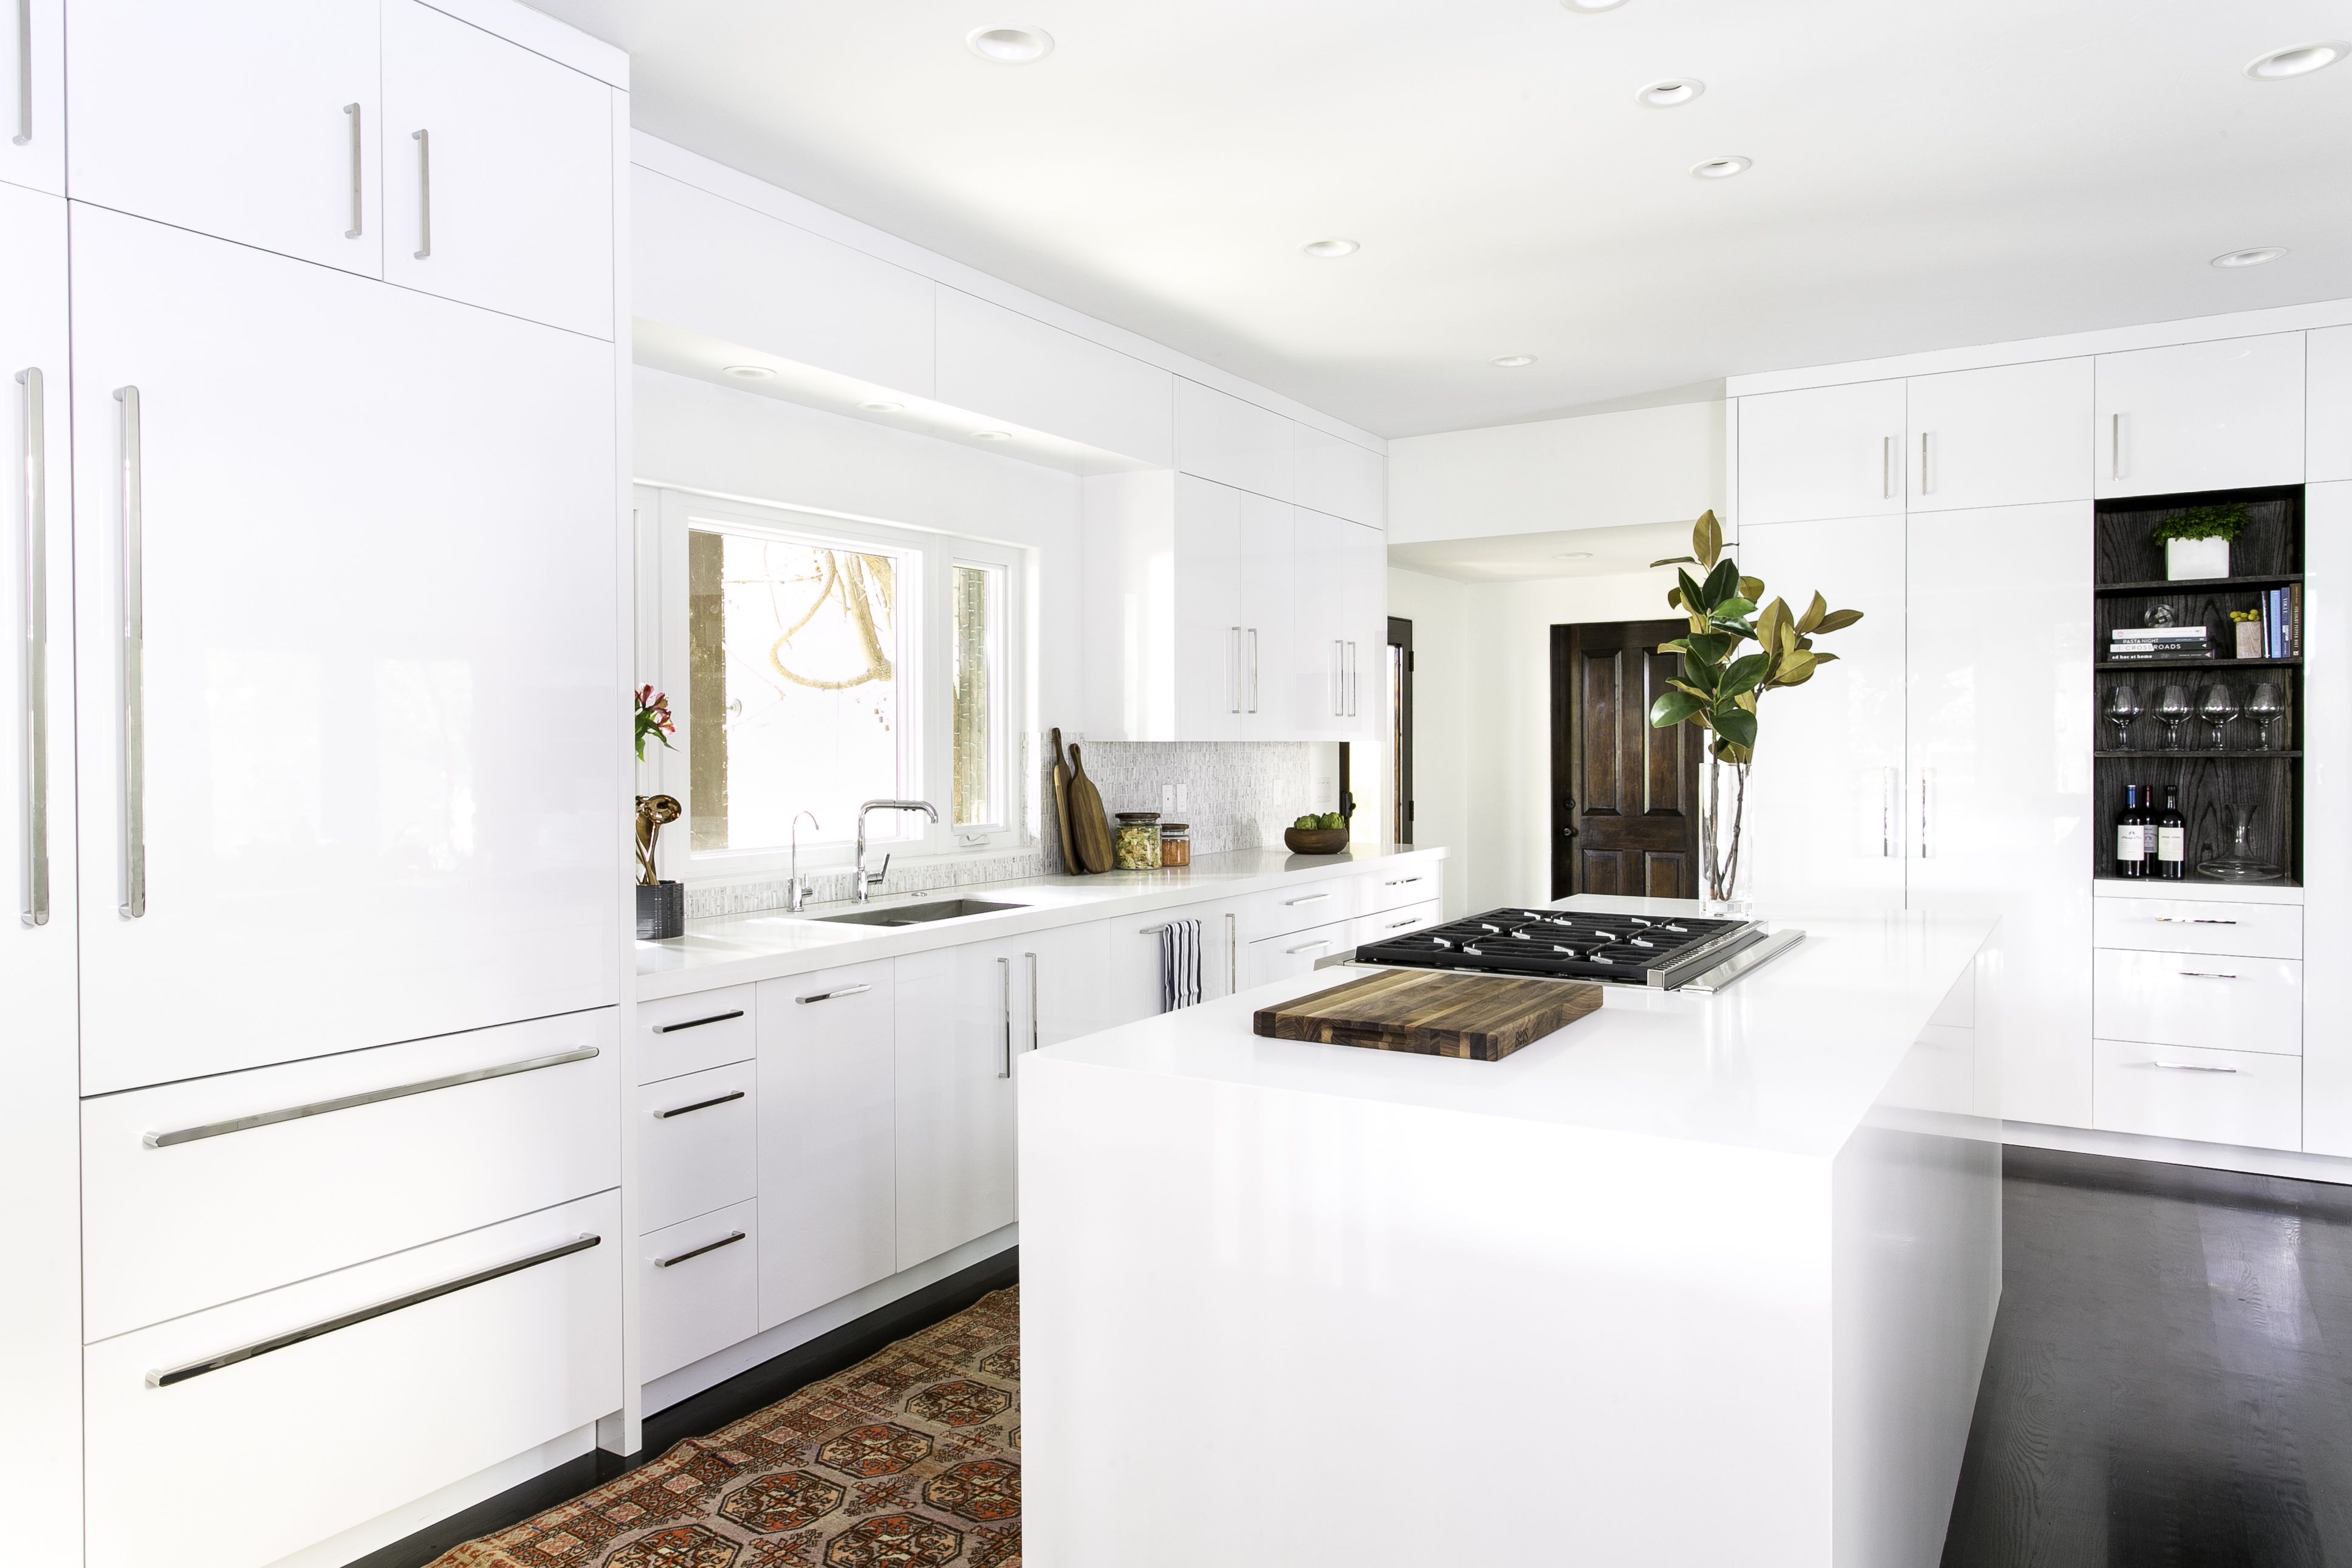 20 Best White Kitchen Cabinets   Design Ideas for White Cabinets